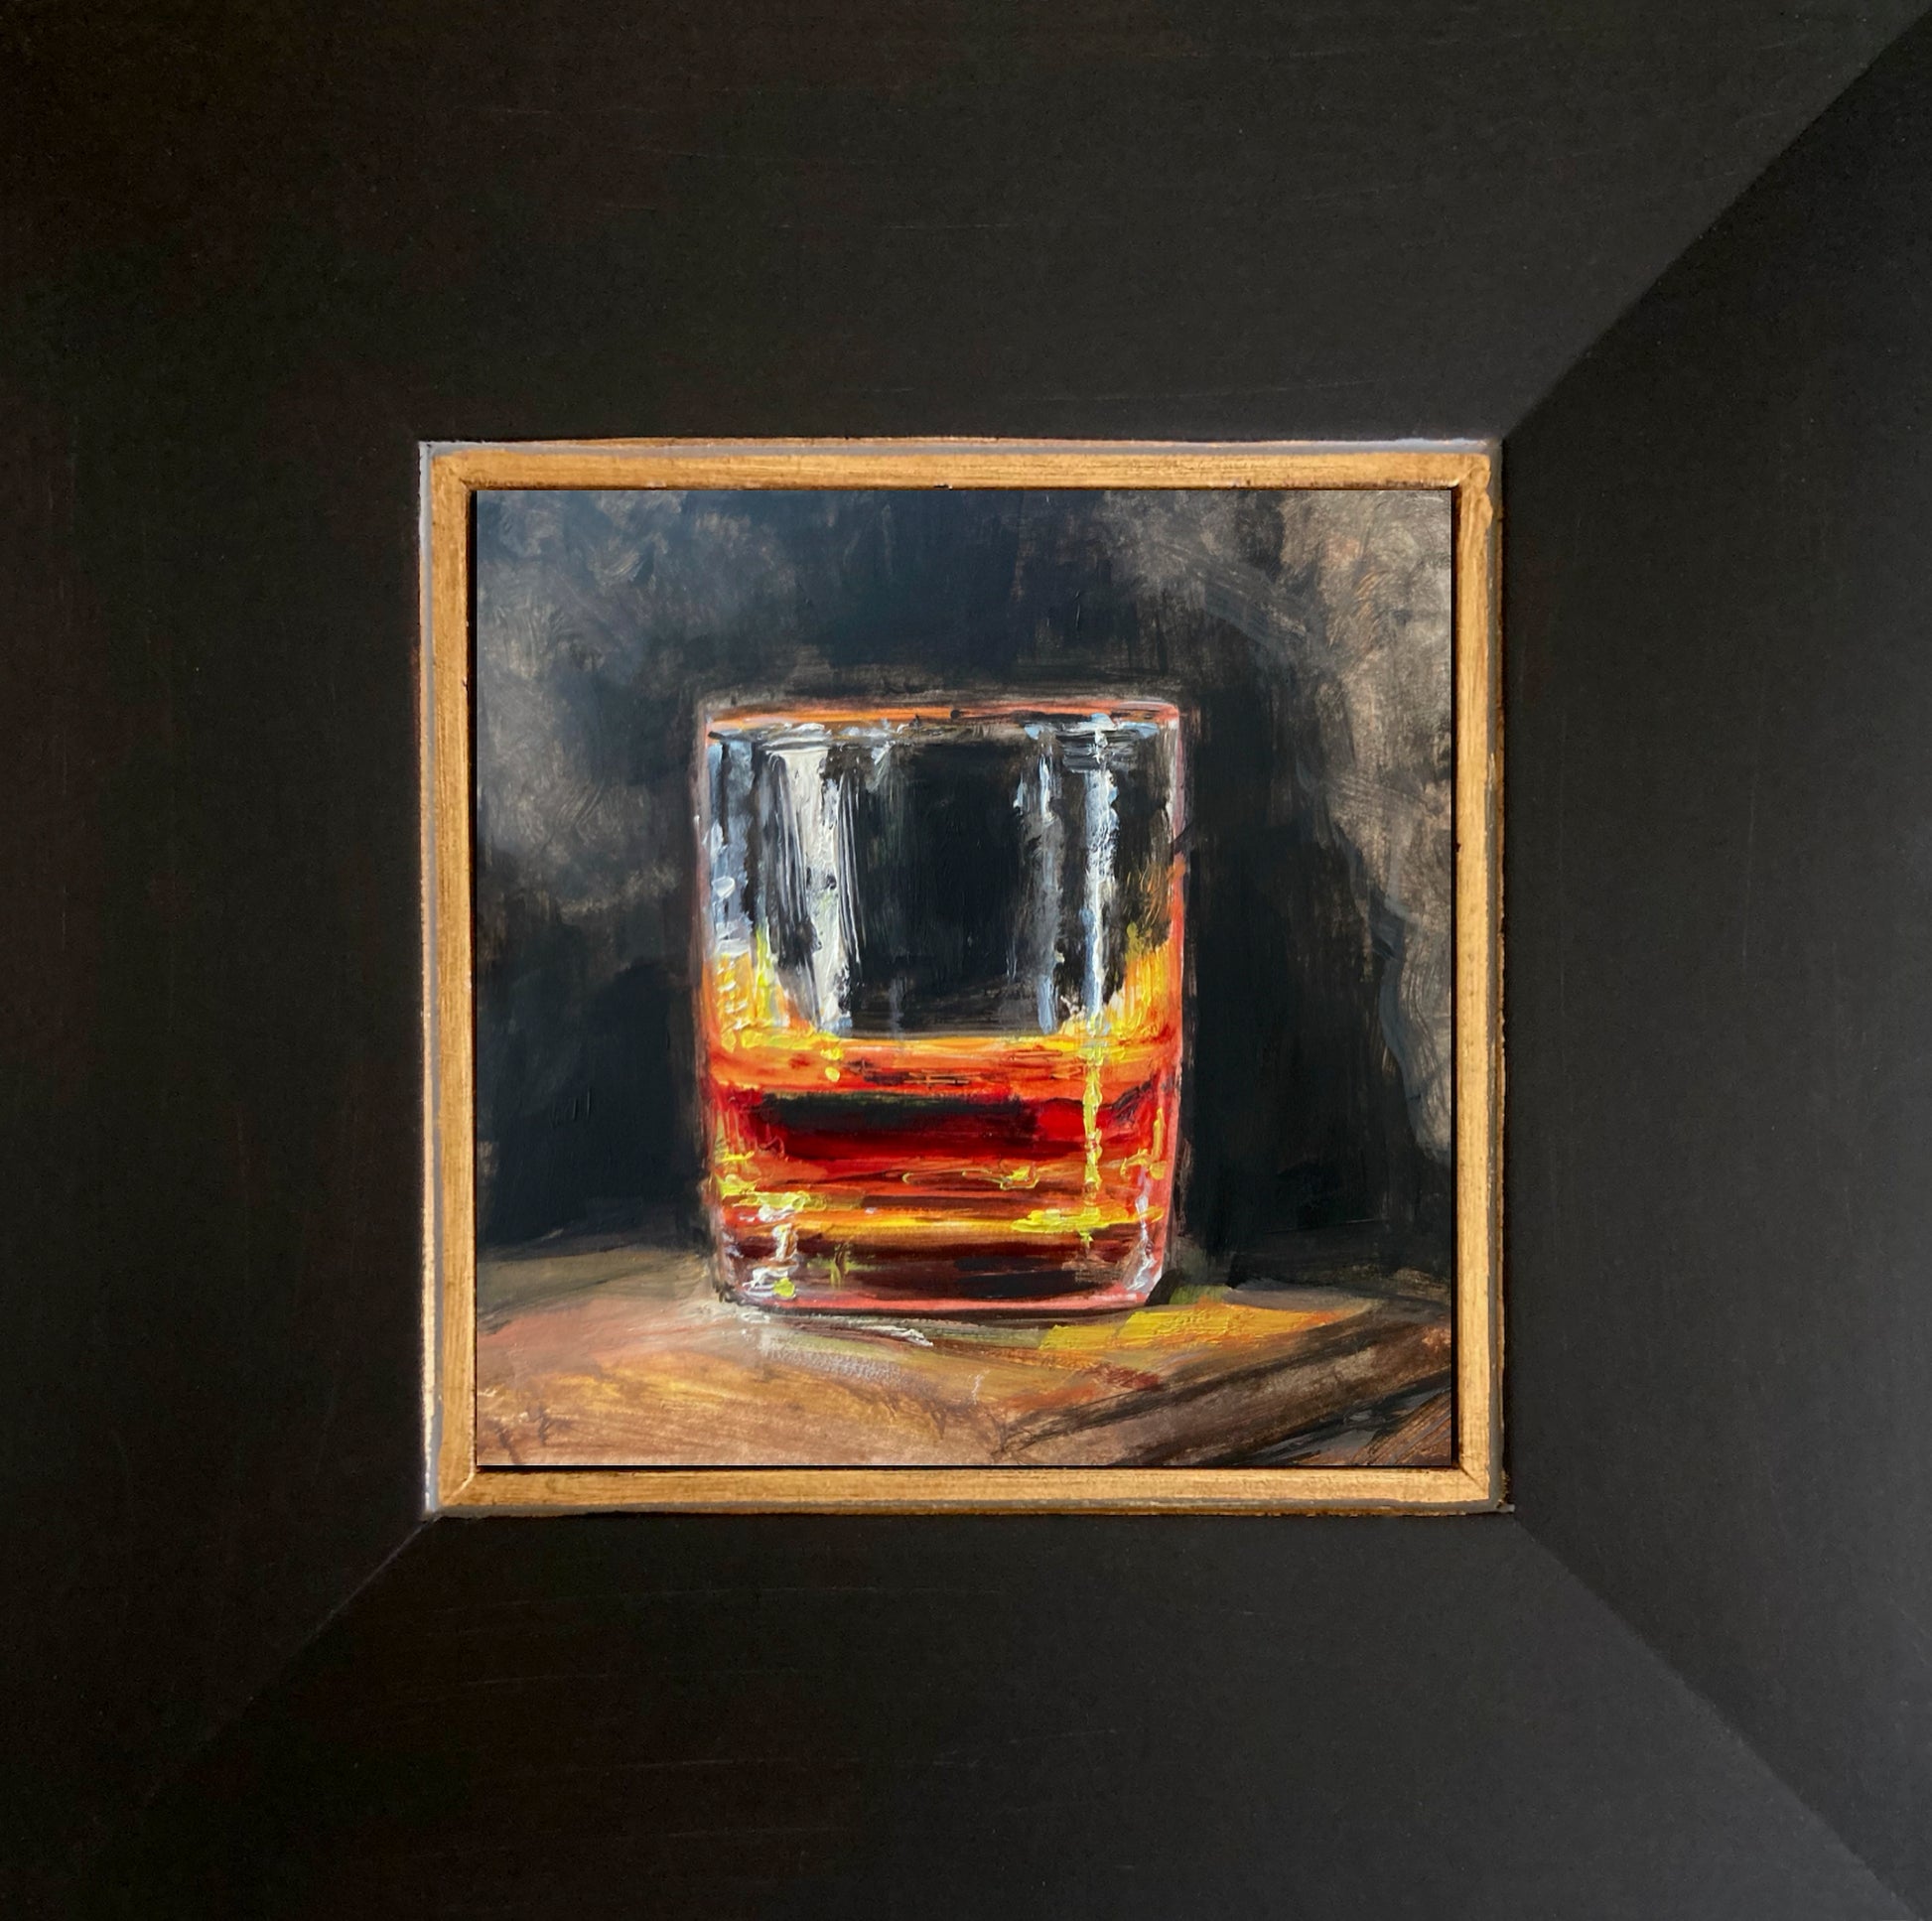 Oil painting of cocktail glass and drink by E. E. Jacks - dark background. Dark wood frame with gold trim  